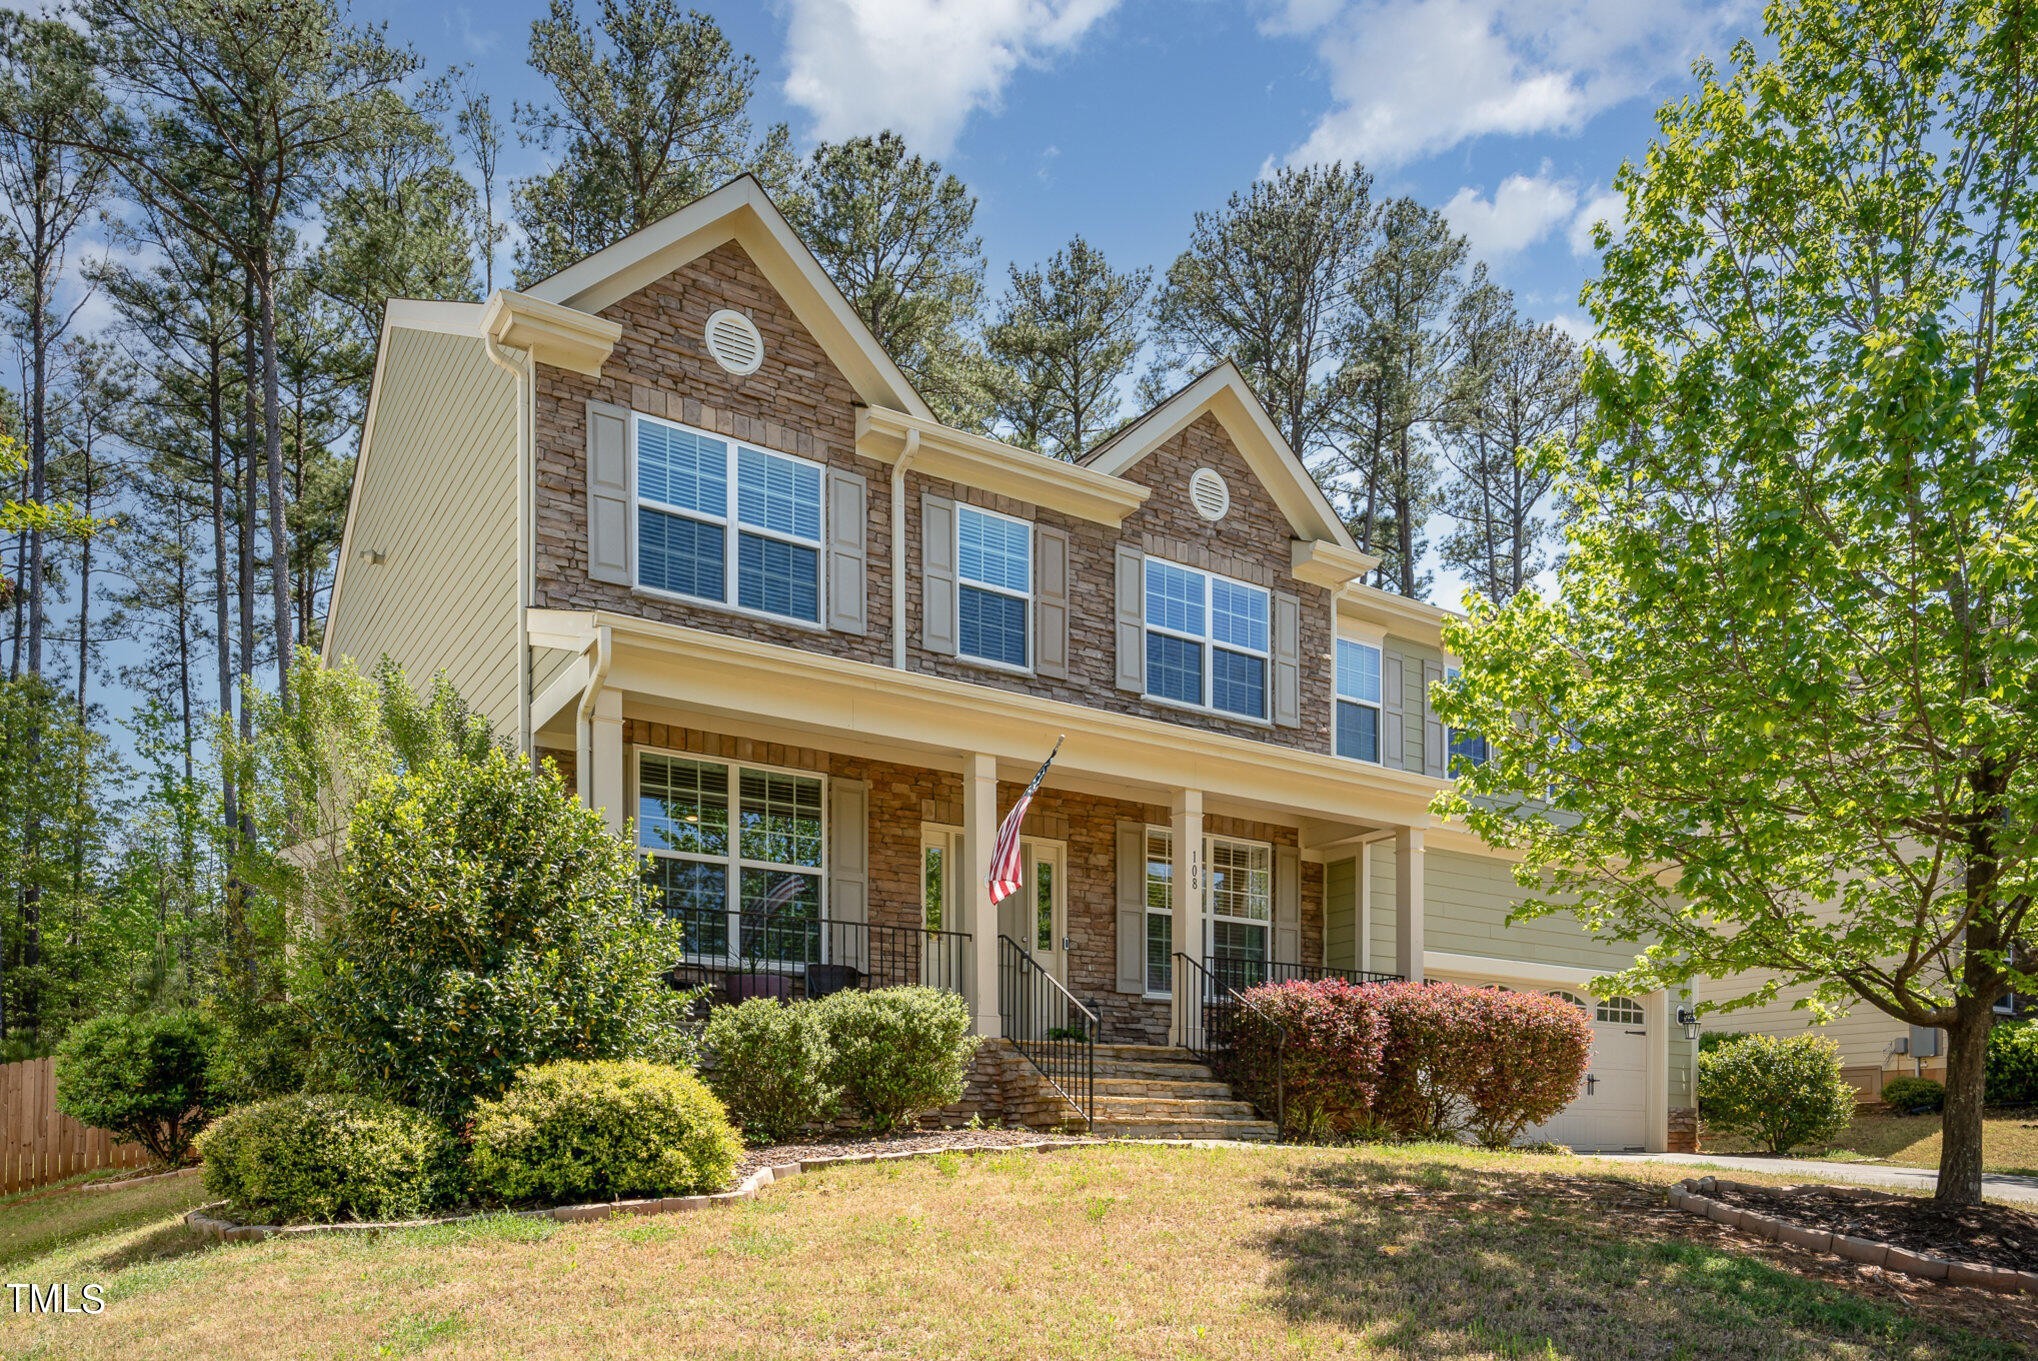 2. 108 Ulverston Drive, Holly Springs Nc 27540